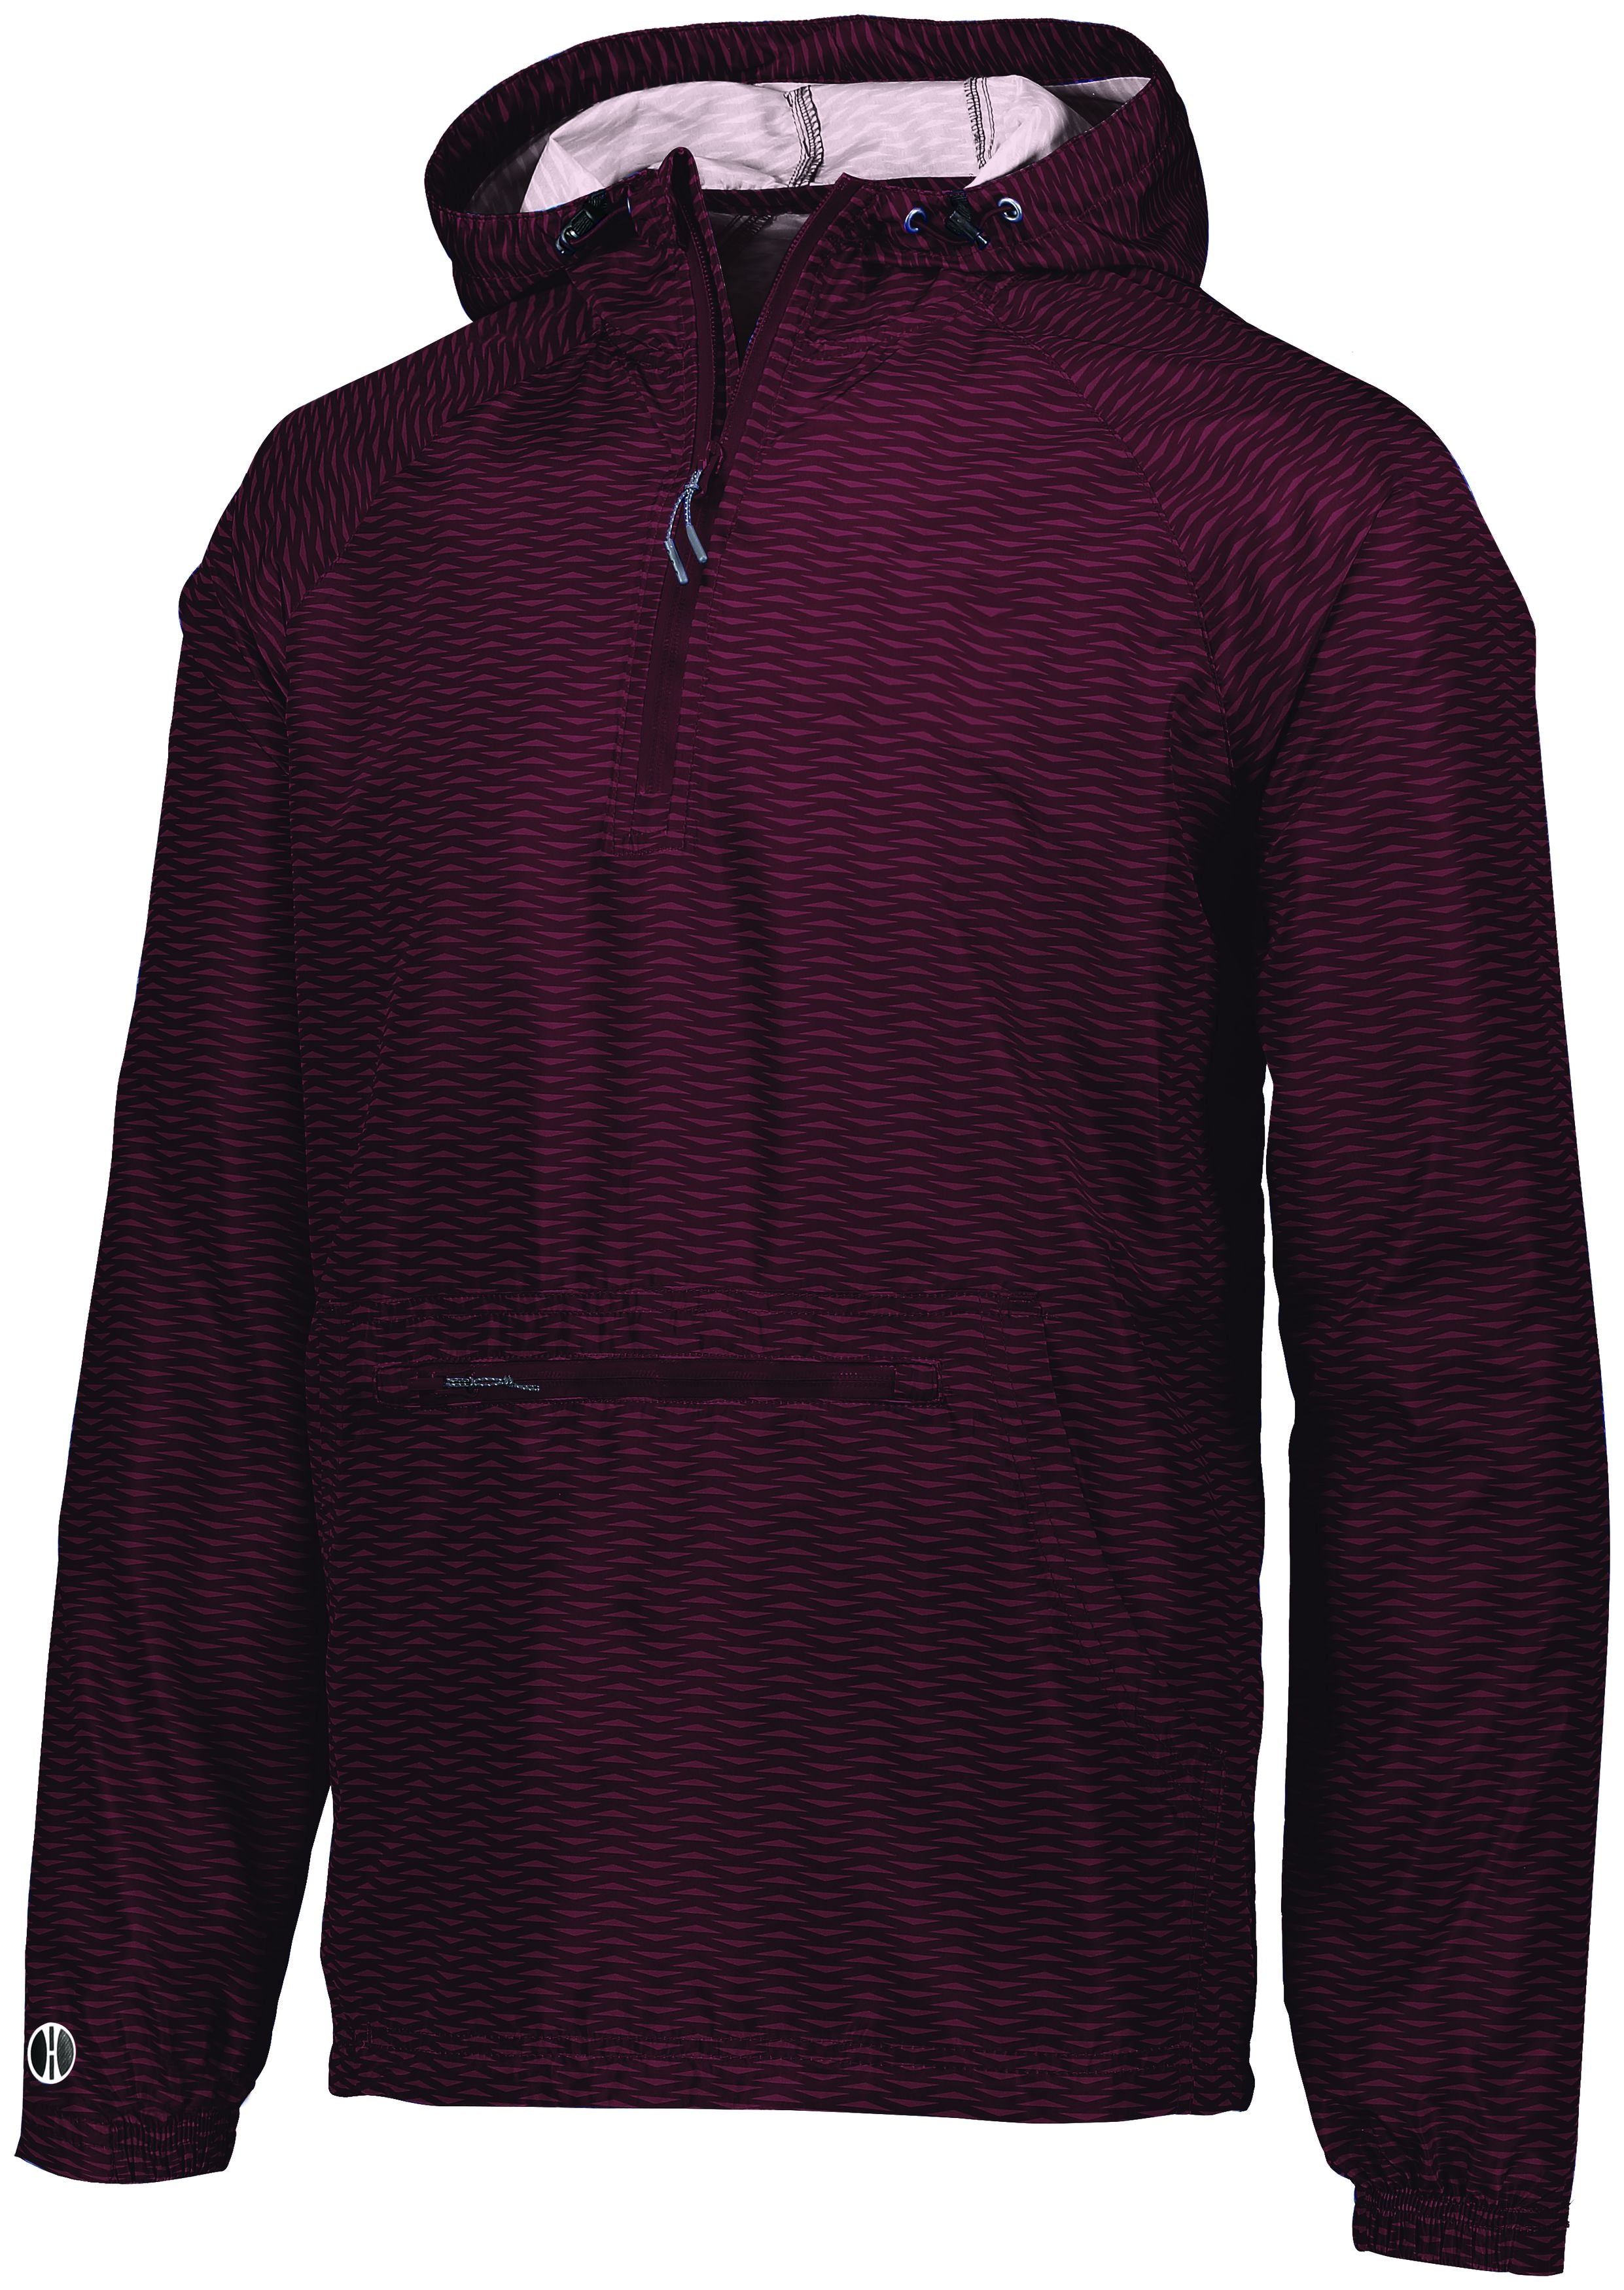 Holloway Range Packable Pullover in Maroon  -Part of the Adult, Adult-Pullover, Holloway, Outerwear, Range-Collection product lines at KanaleyCreations.com